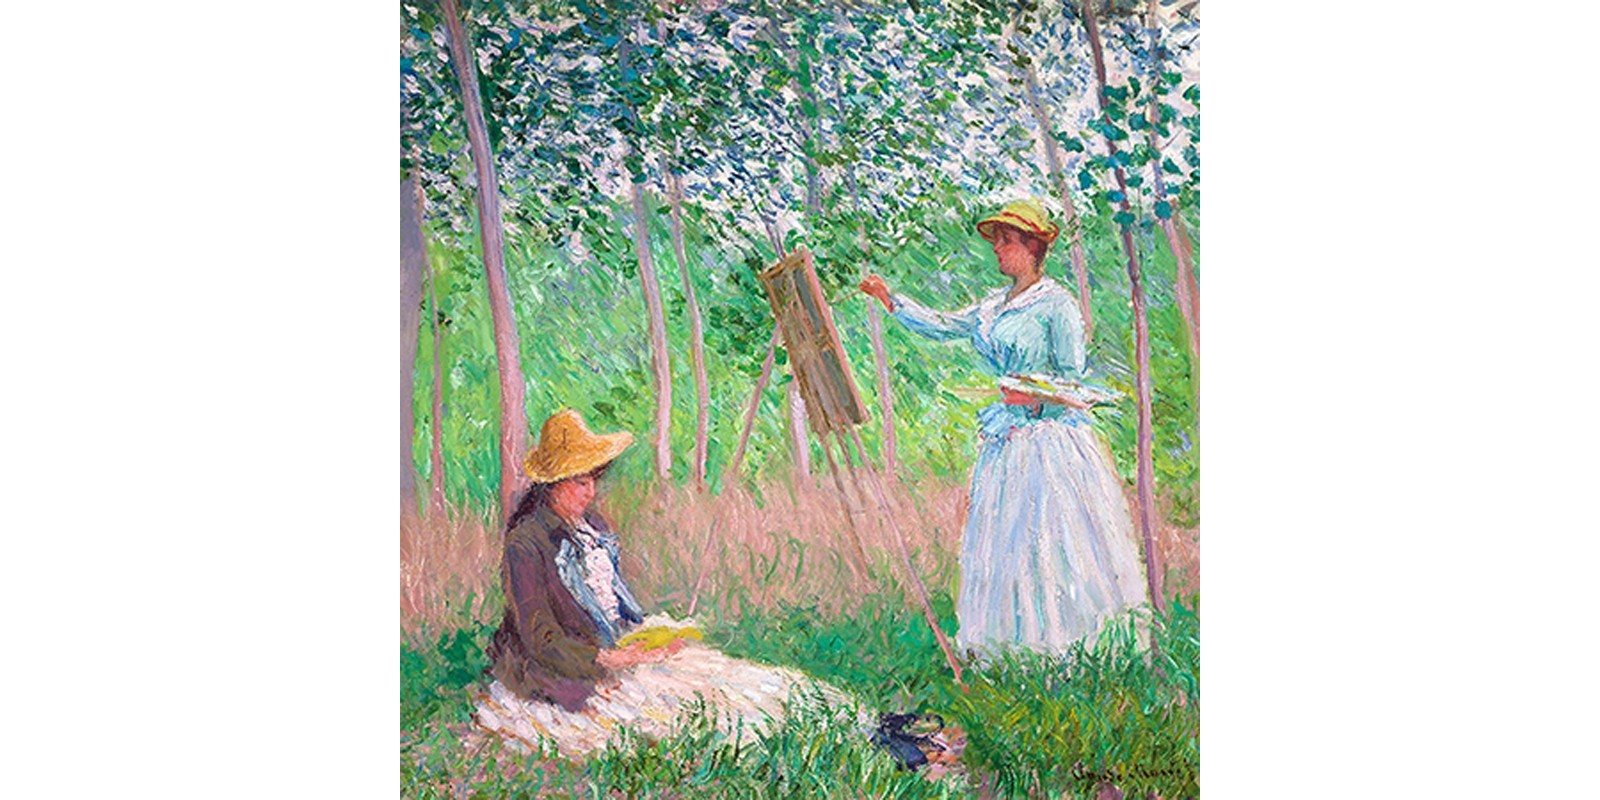 Claude Monet - In the Woods at Giverny